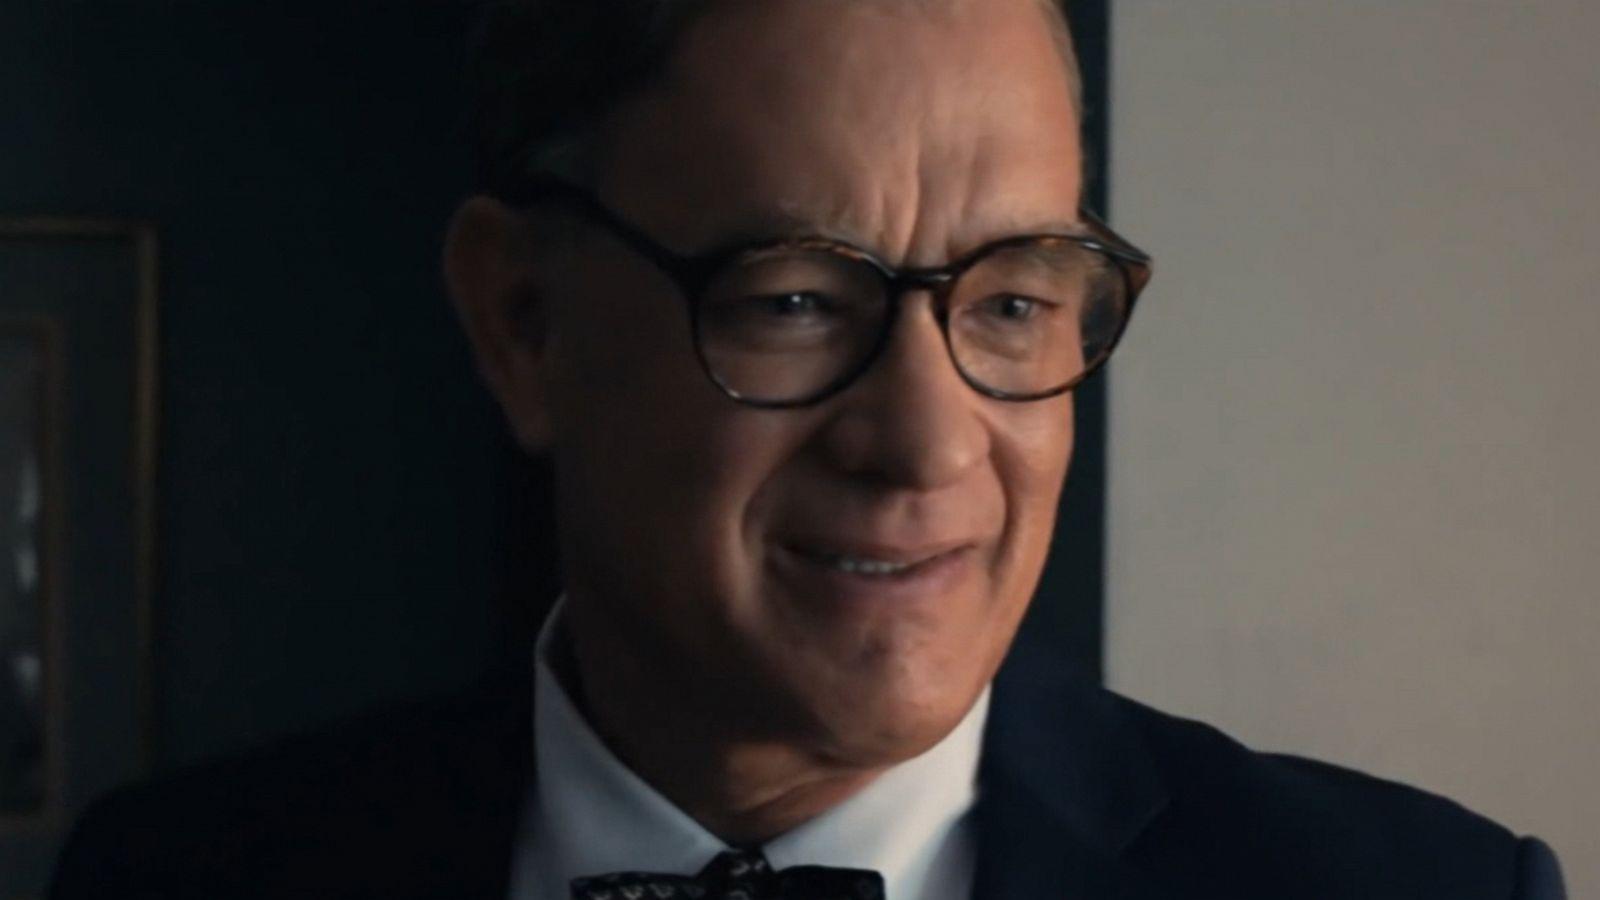 Tom Hanks, who portrays Mister Rogers in 'A Beautiful Day